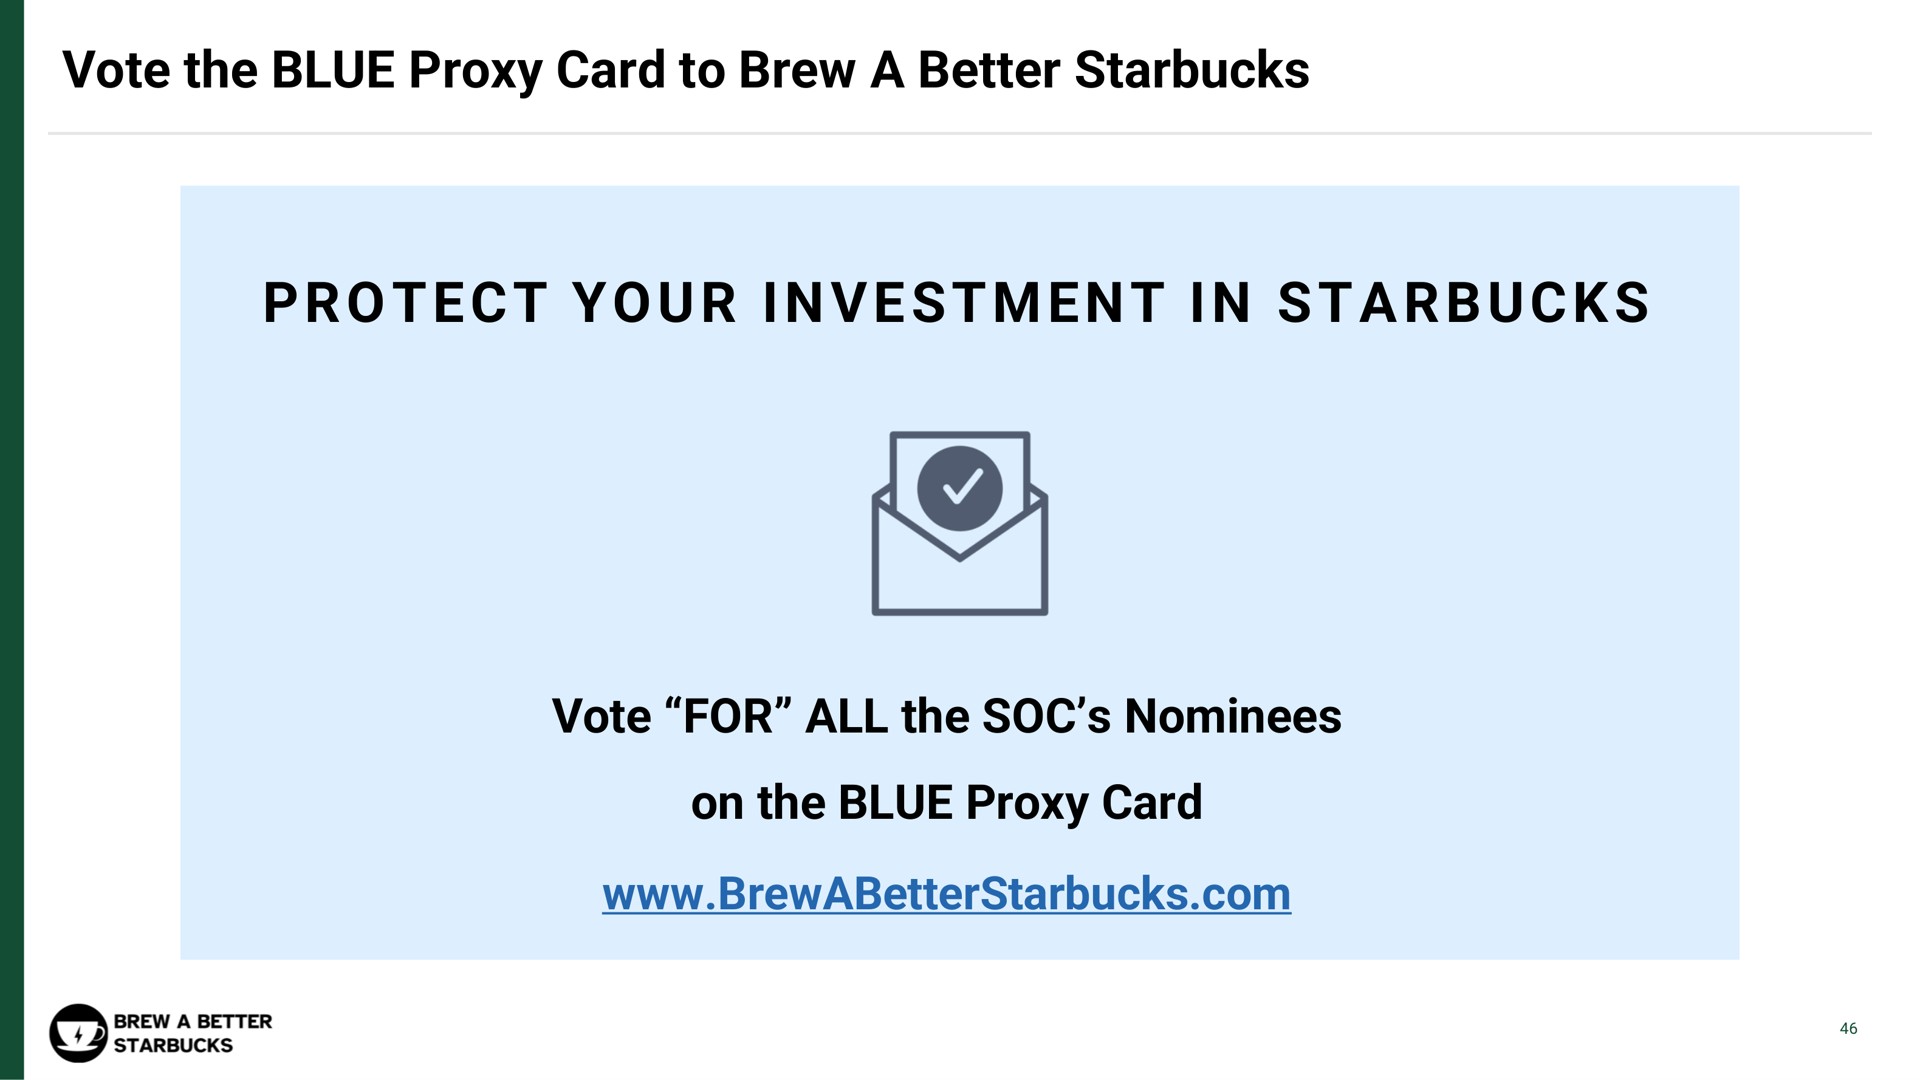 vote the blue proxy card to brew a better i i a vote for all the soc nominees on the blue proxy card protect your investment in | Strategic Organizing Center